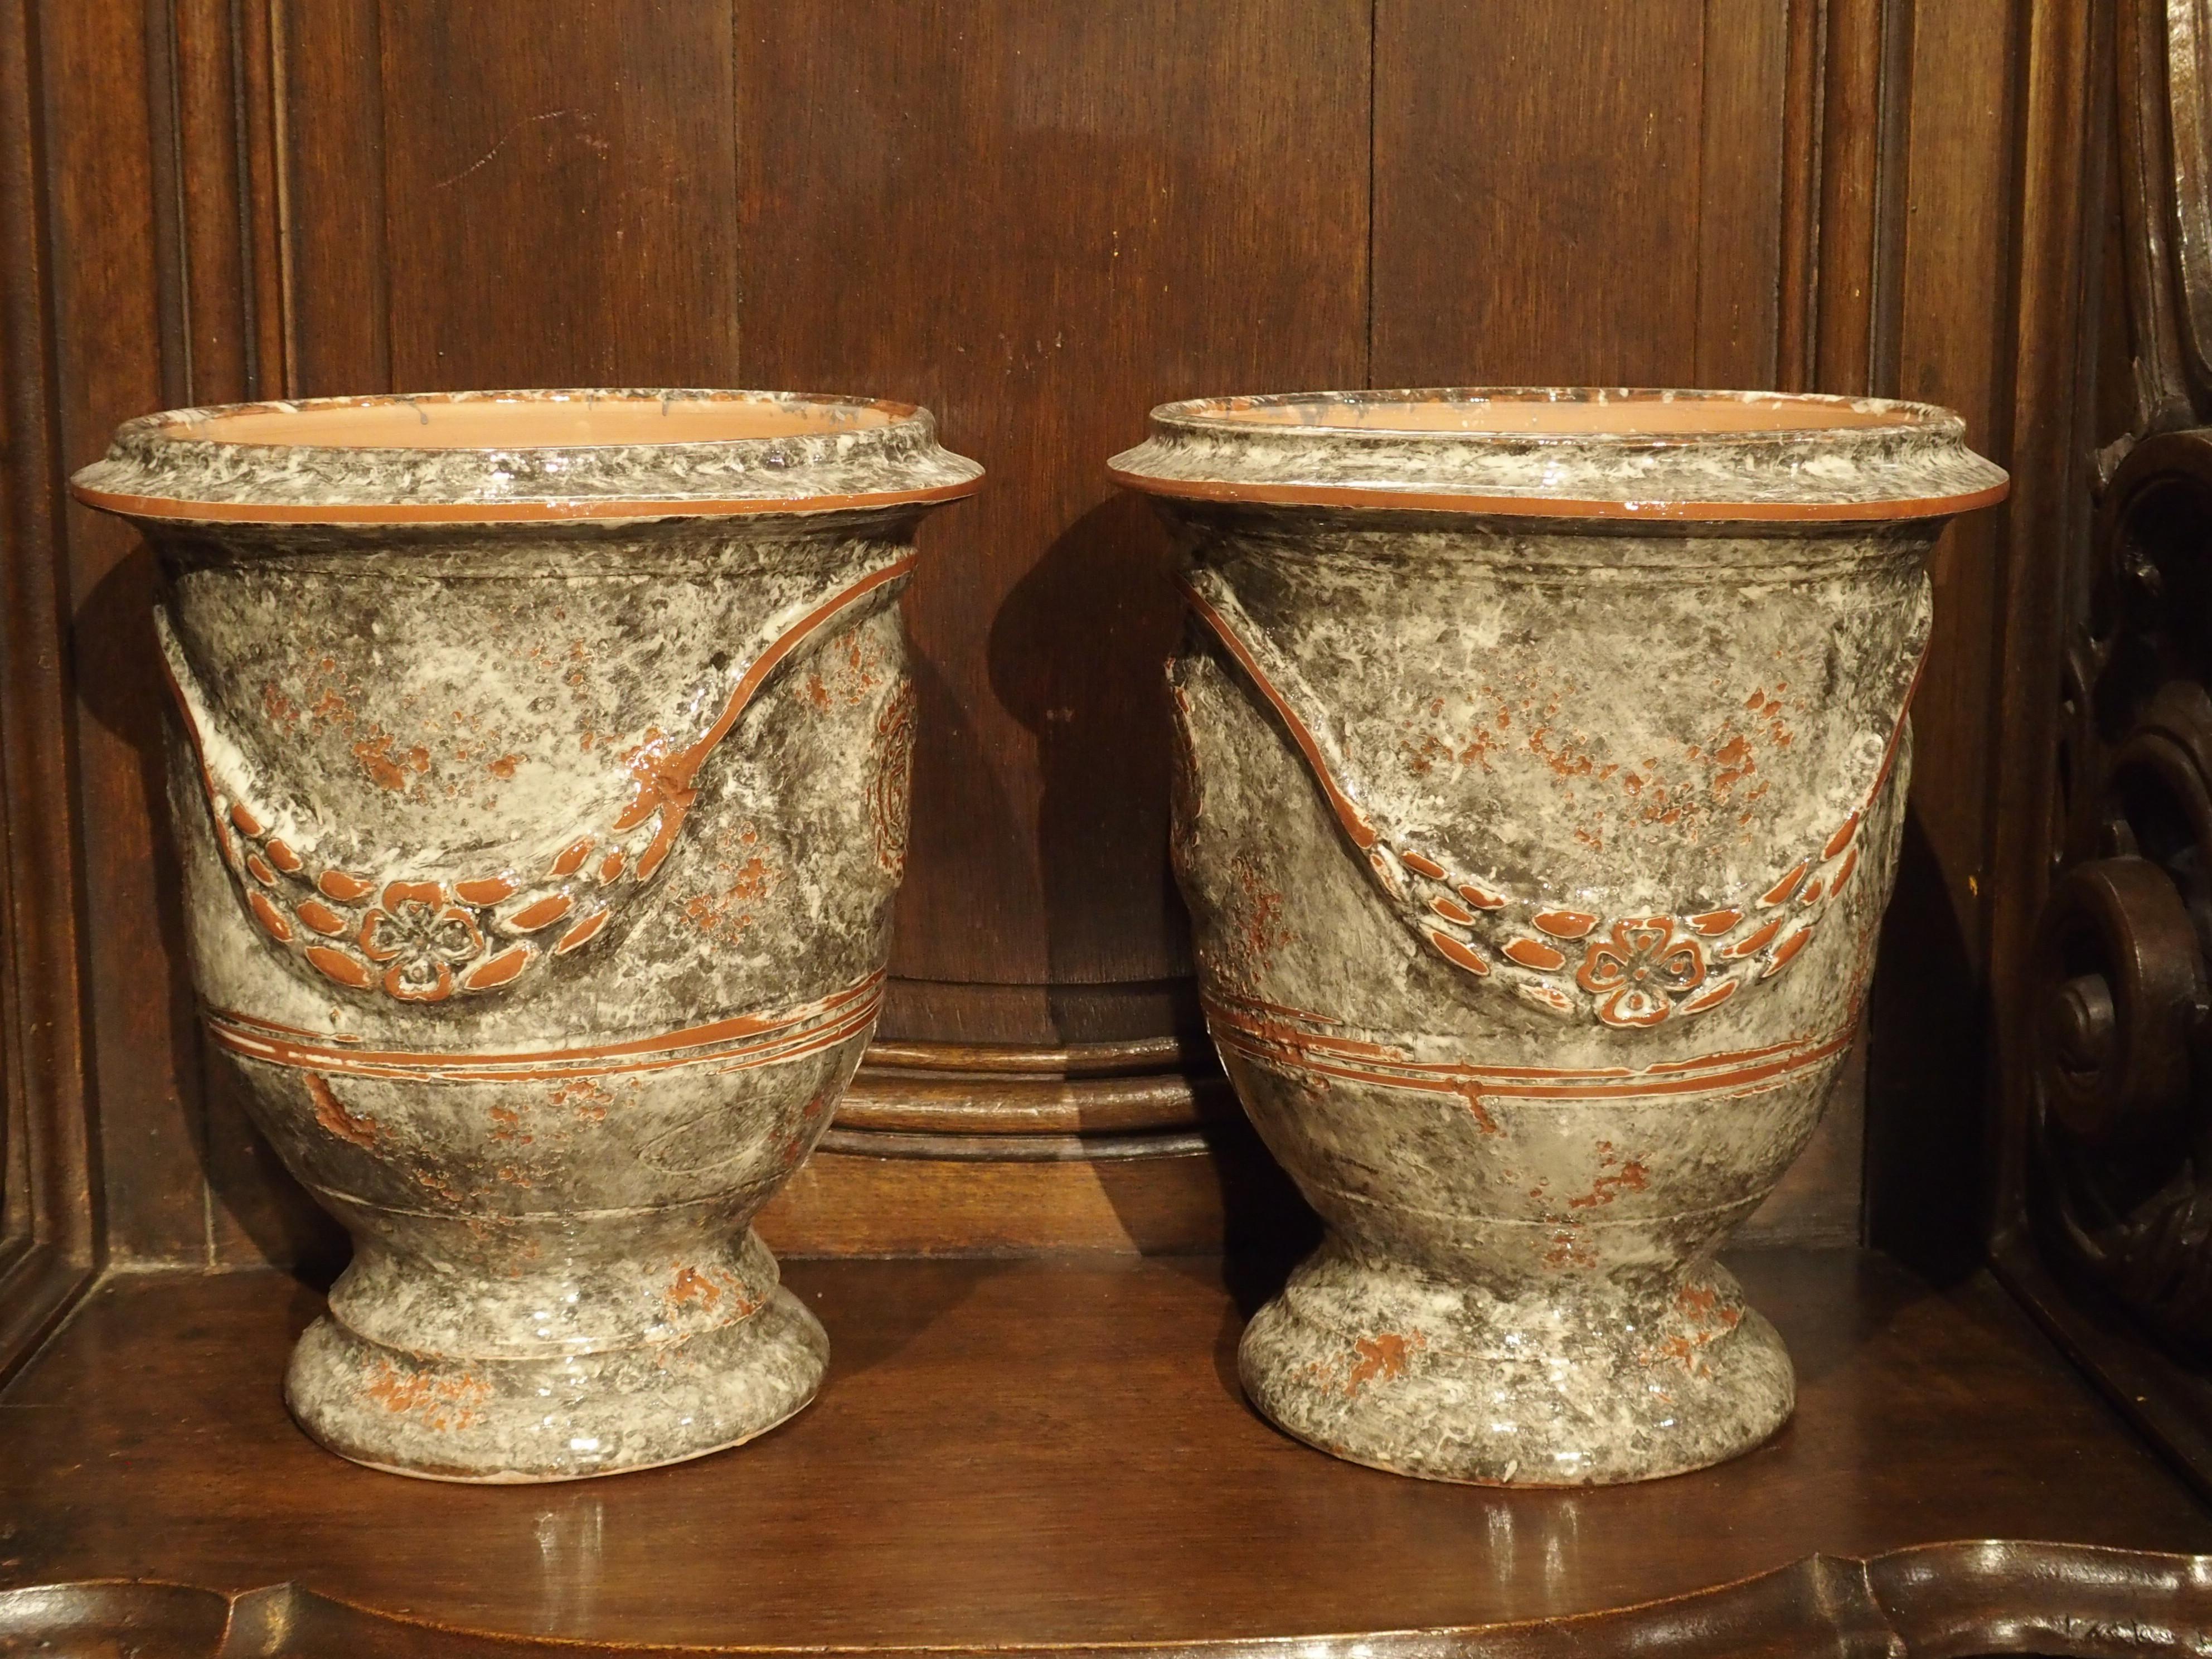 French Pair of Small Glazed Terracotta Anduze Pots from France